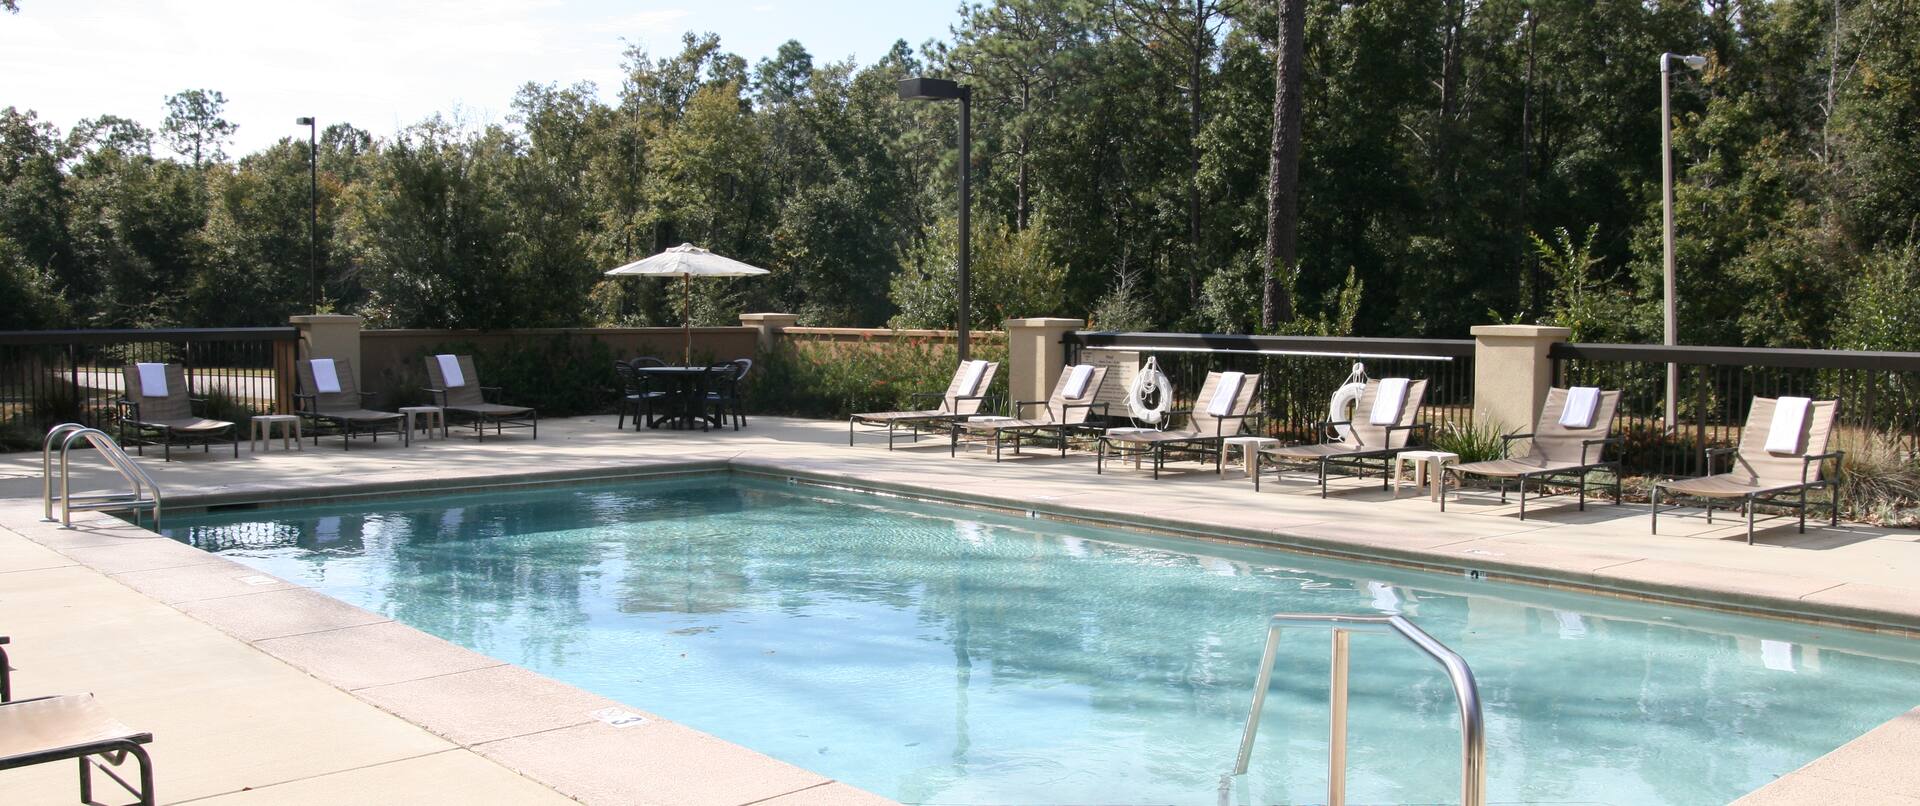 Daytime View of Outdoor Pool Surrounded by Trees, Table With Umbrella, Chairs, and Loungers on a Sunny Day